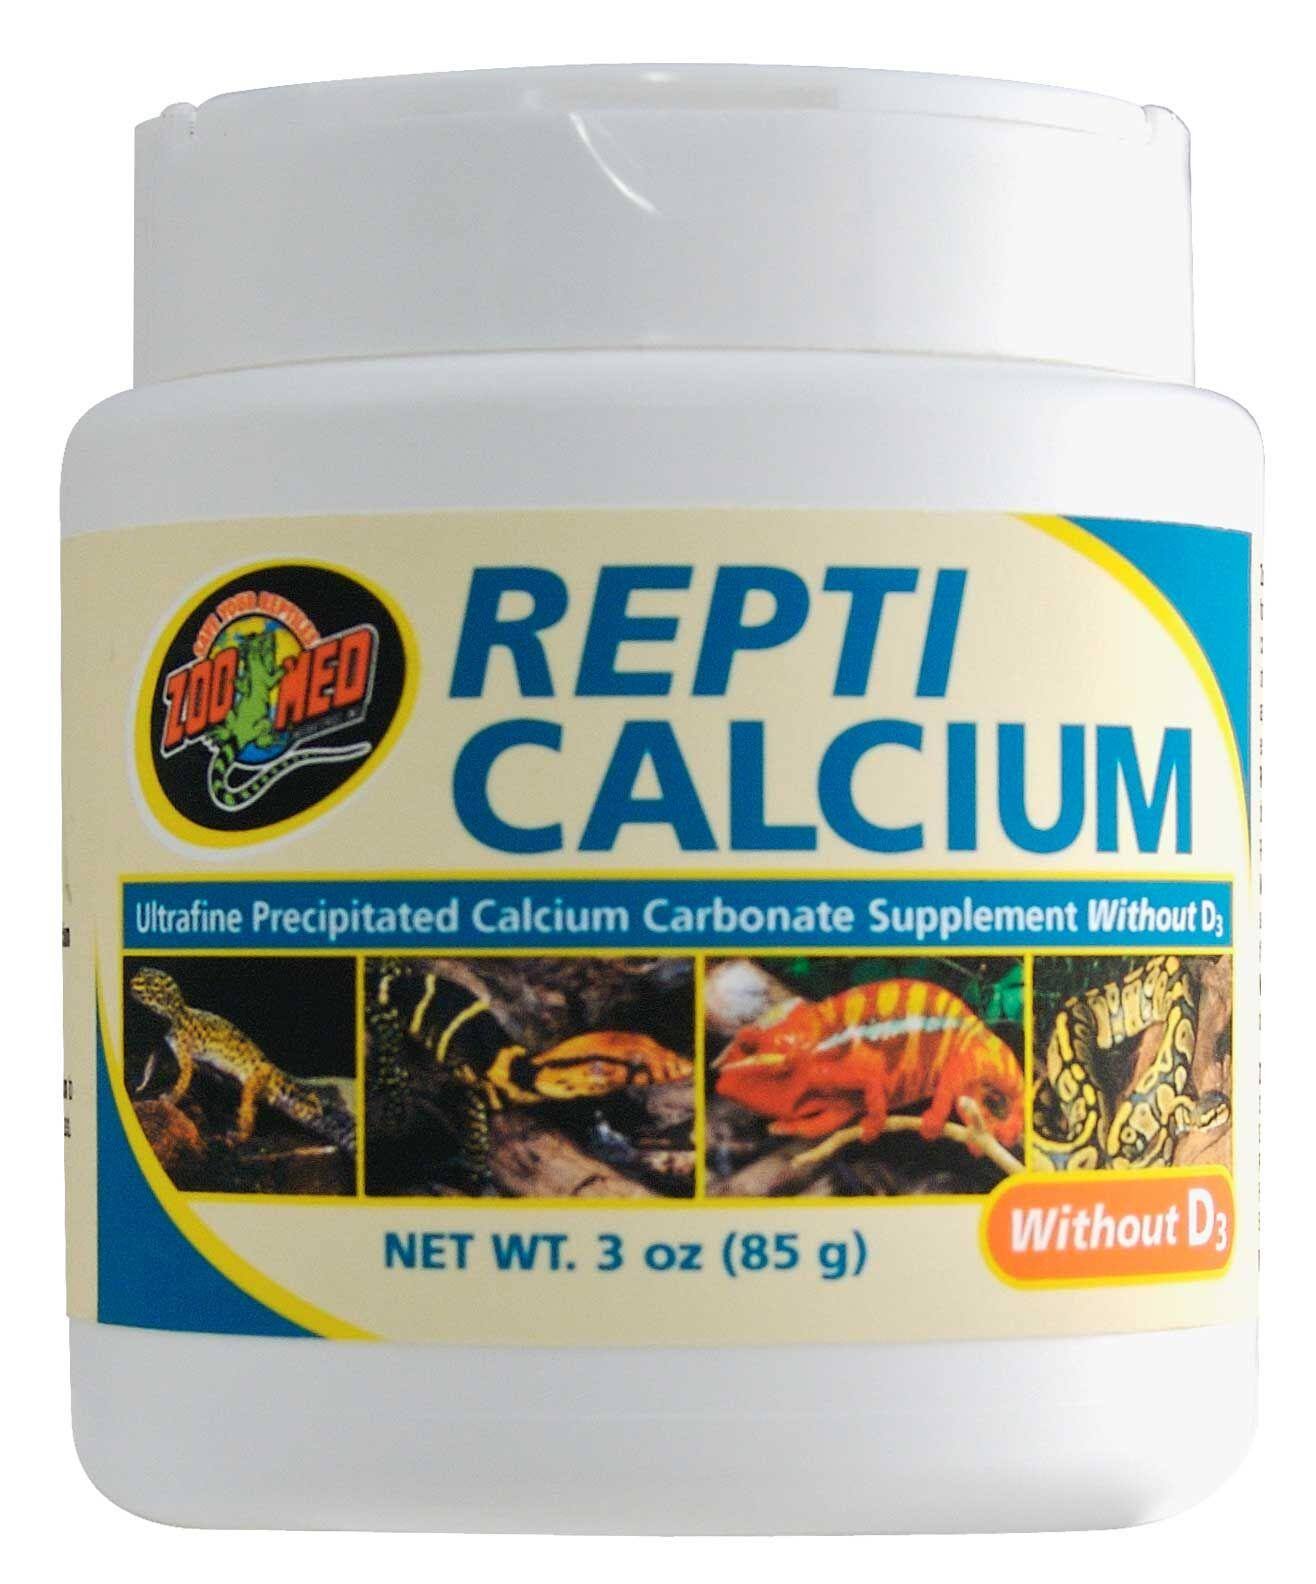 Zoo Med Calcium Reptile Food - without Vitamin D3, 3oz